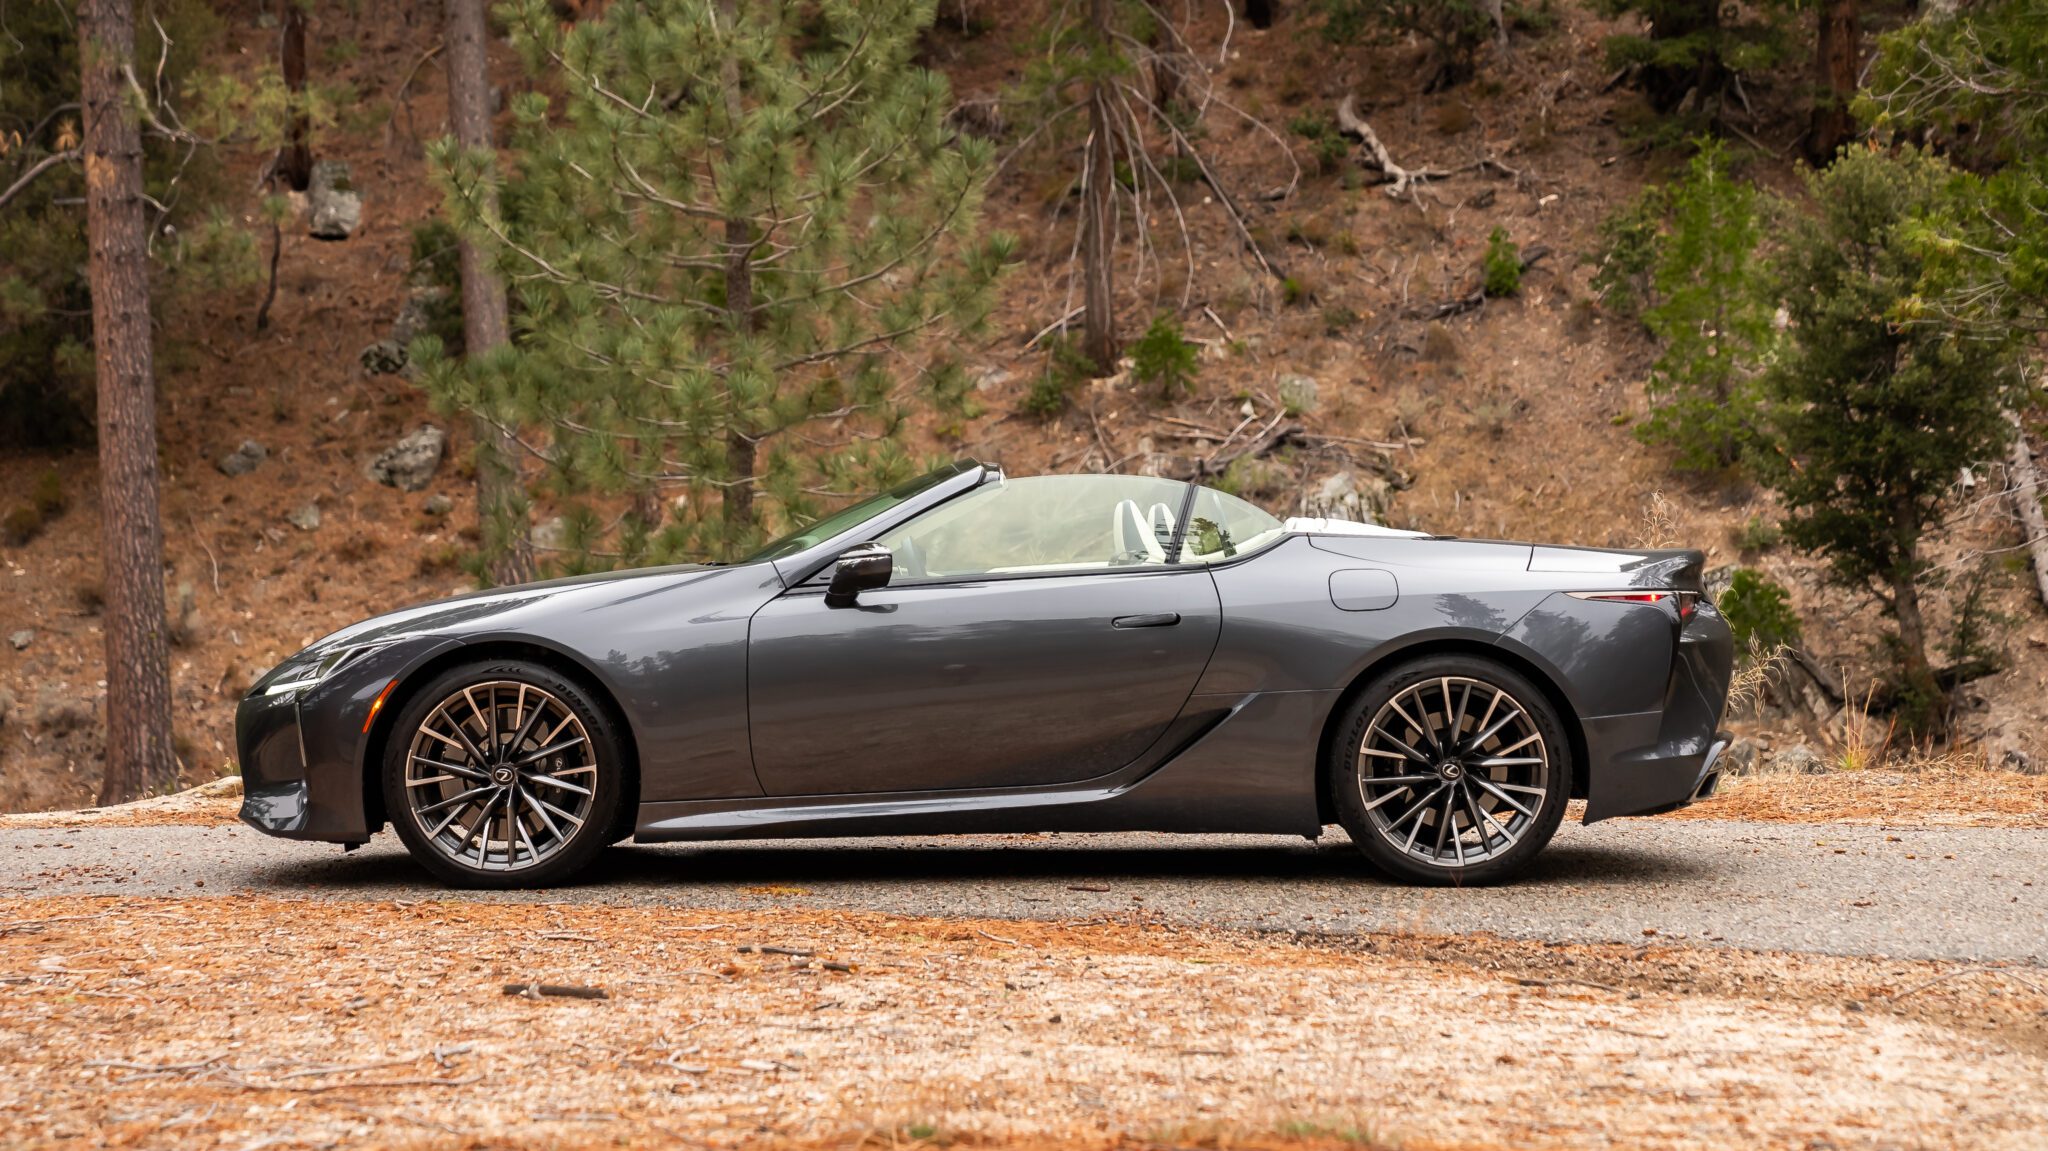 Lexus LC 500 Convertible parked outdoors.